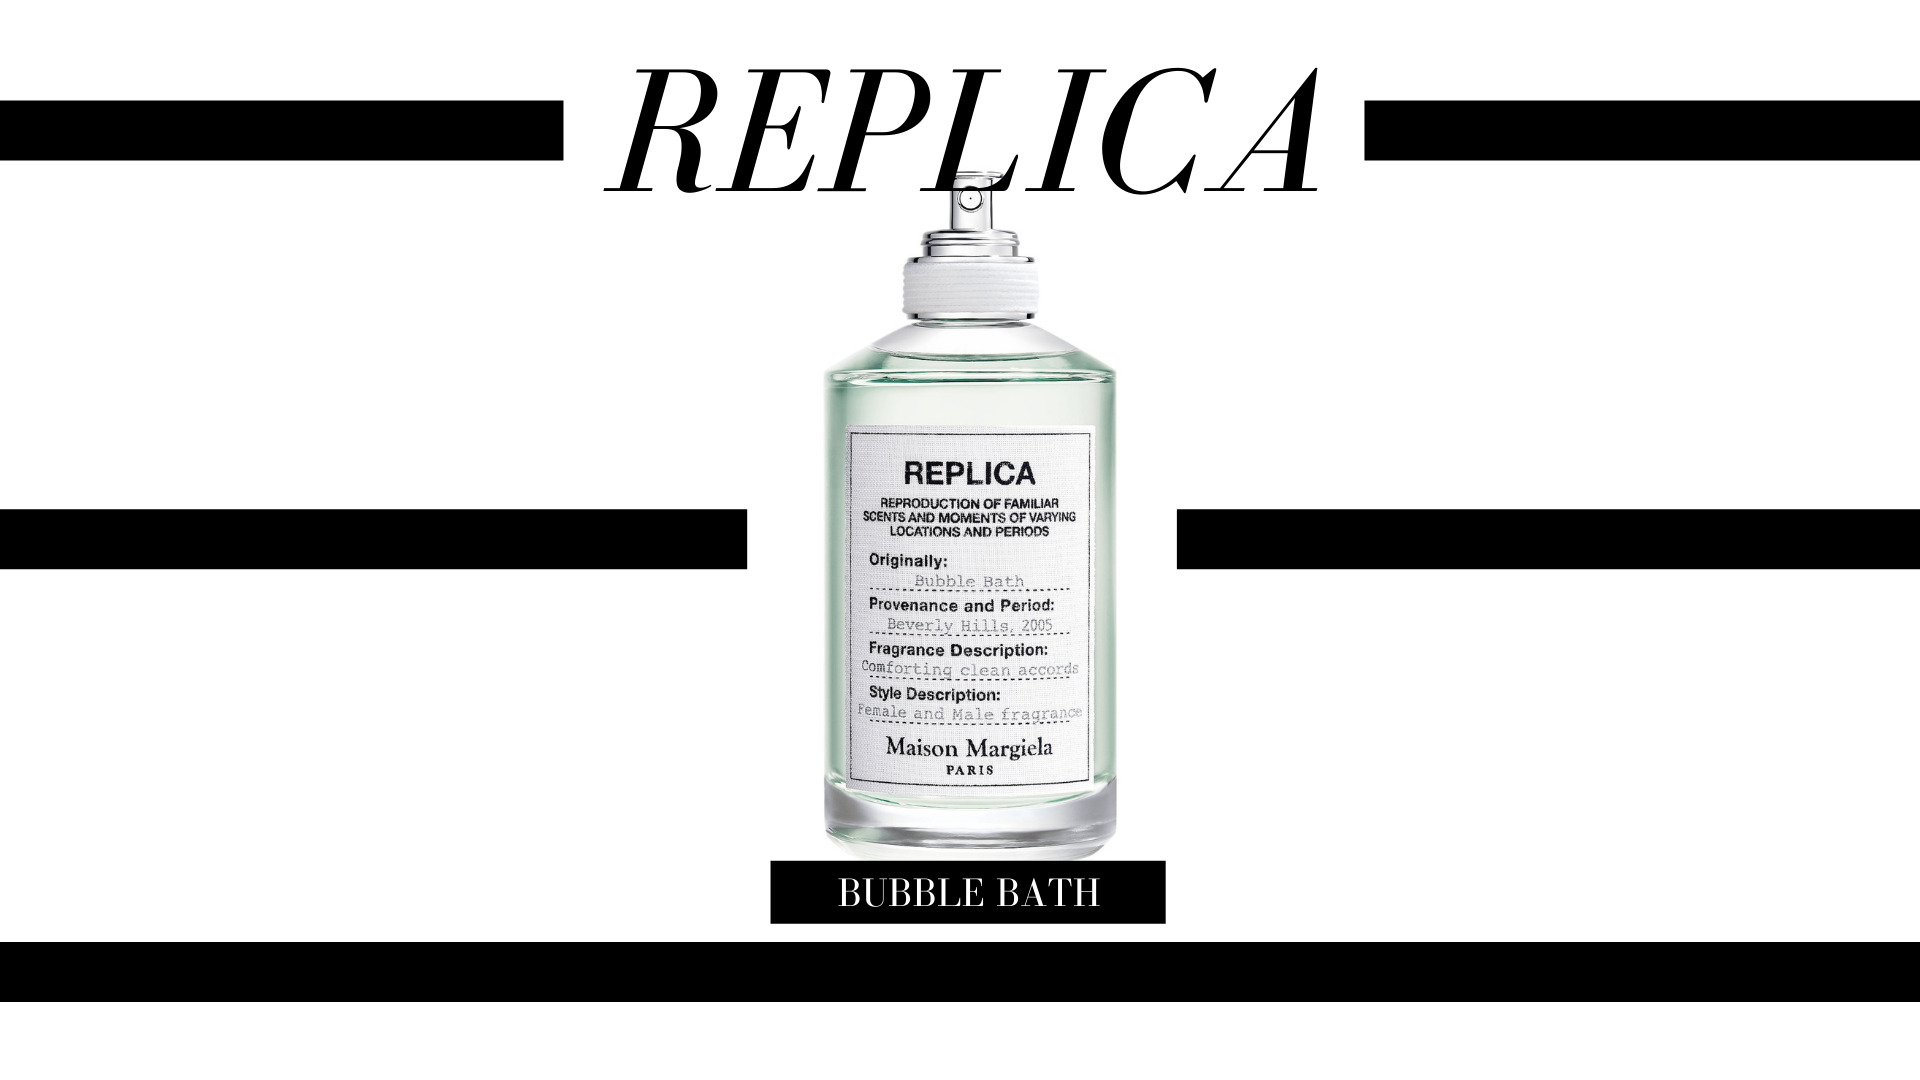 The Maison Margiela 'REPLICA' Bubble Bath is a super fresh fragrance! Perfect for warmer days! This fresh floral perfume contains an aromatic soap bubble harmony accented by the soft floral scents of rose super essence, jasmine, and lavender